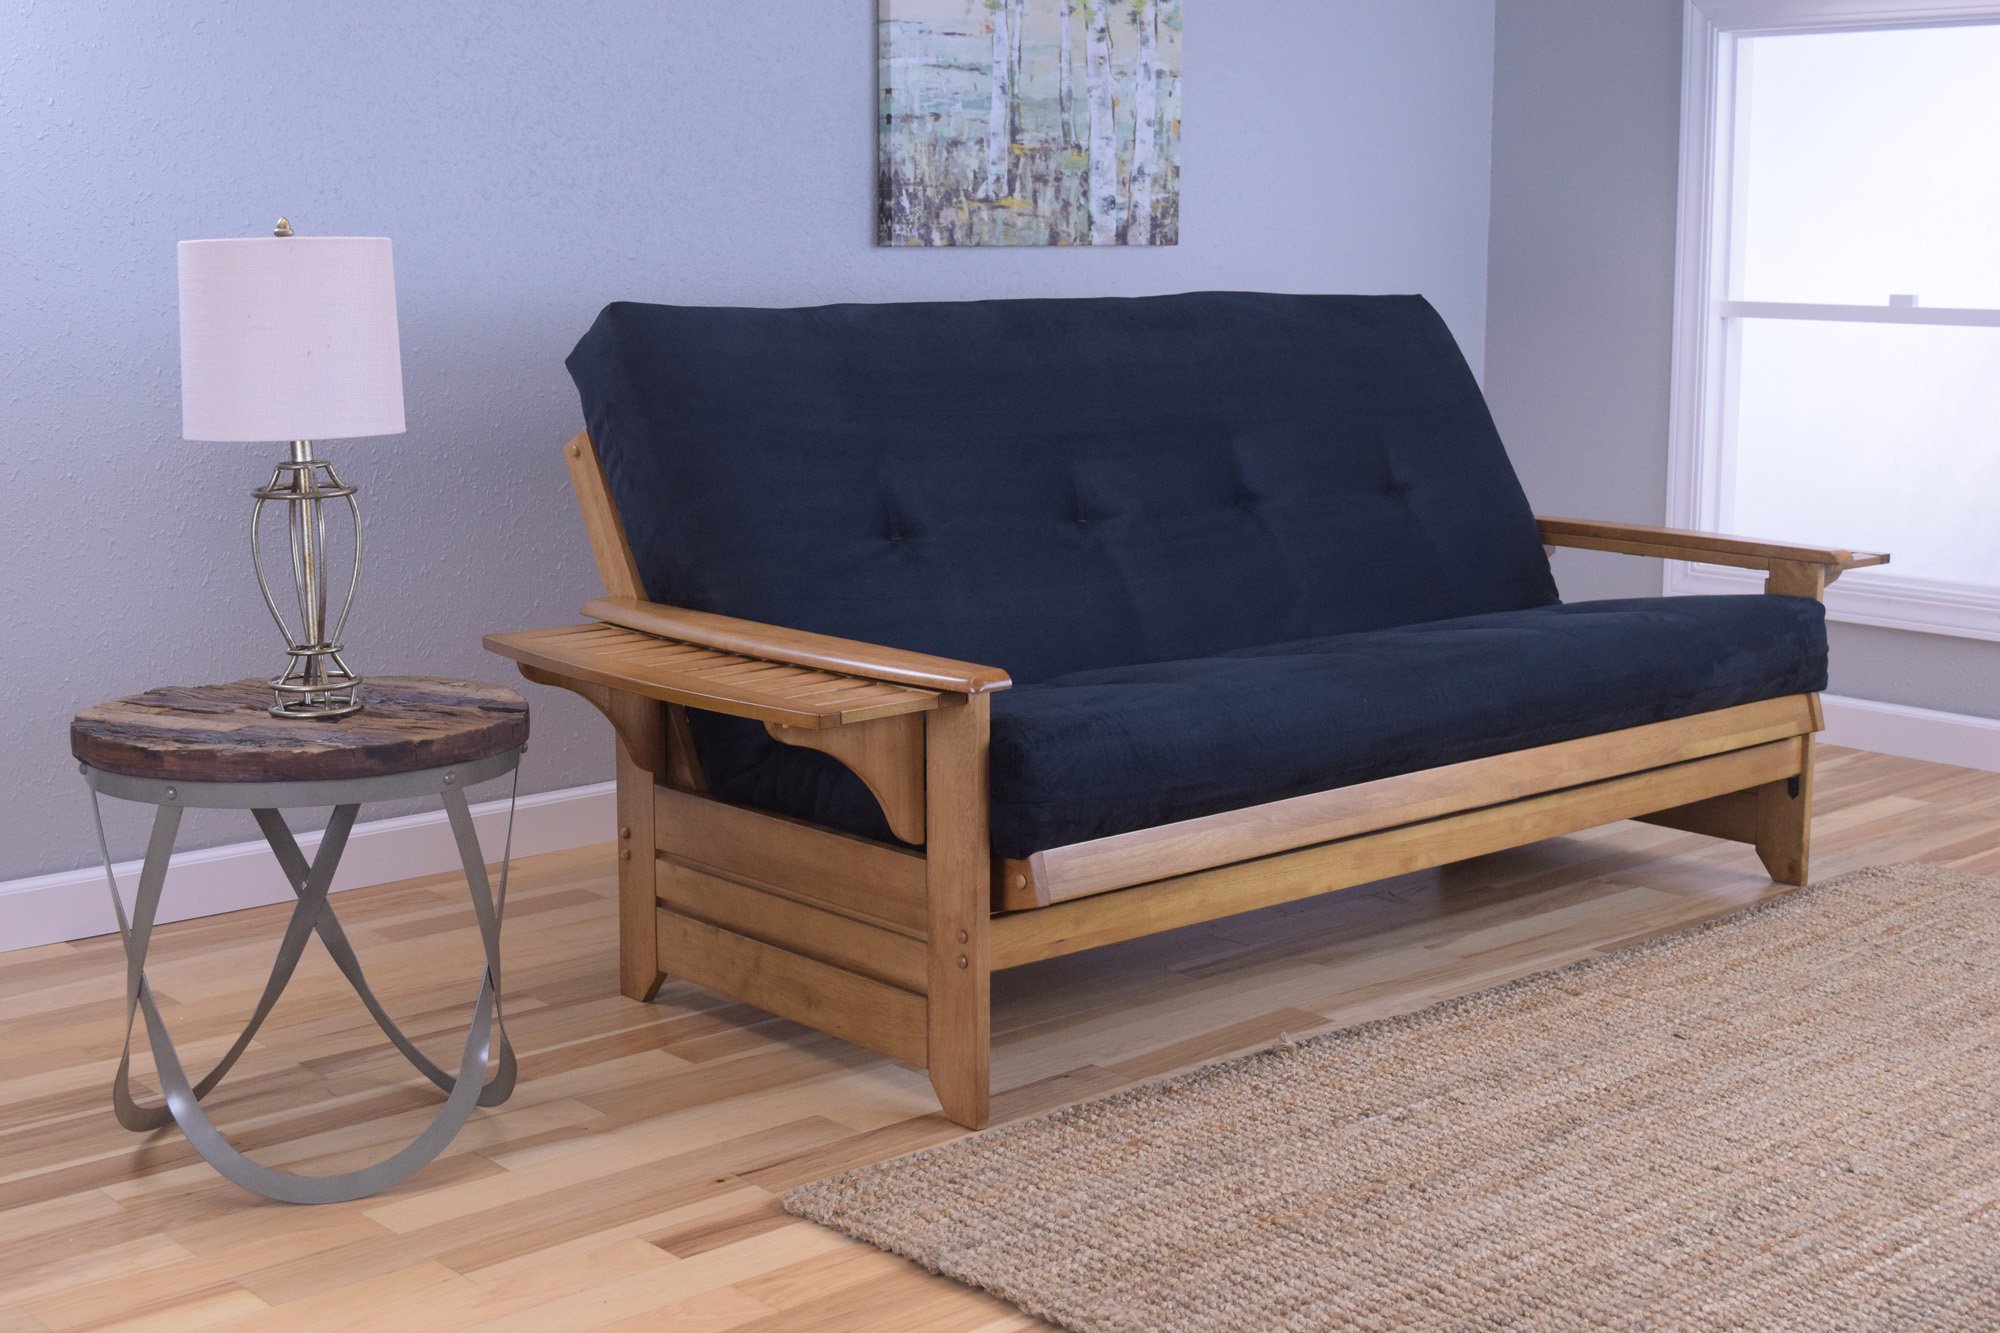 How to Keep a Queen Futon from Sliding: Futonland No Slip Futon Grips  Review 